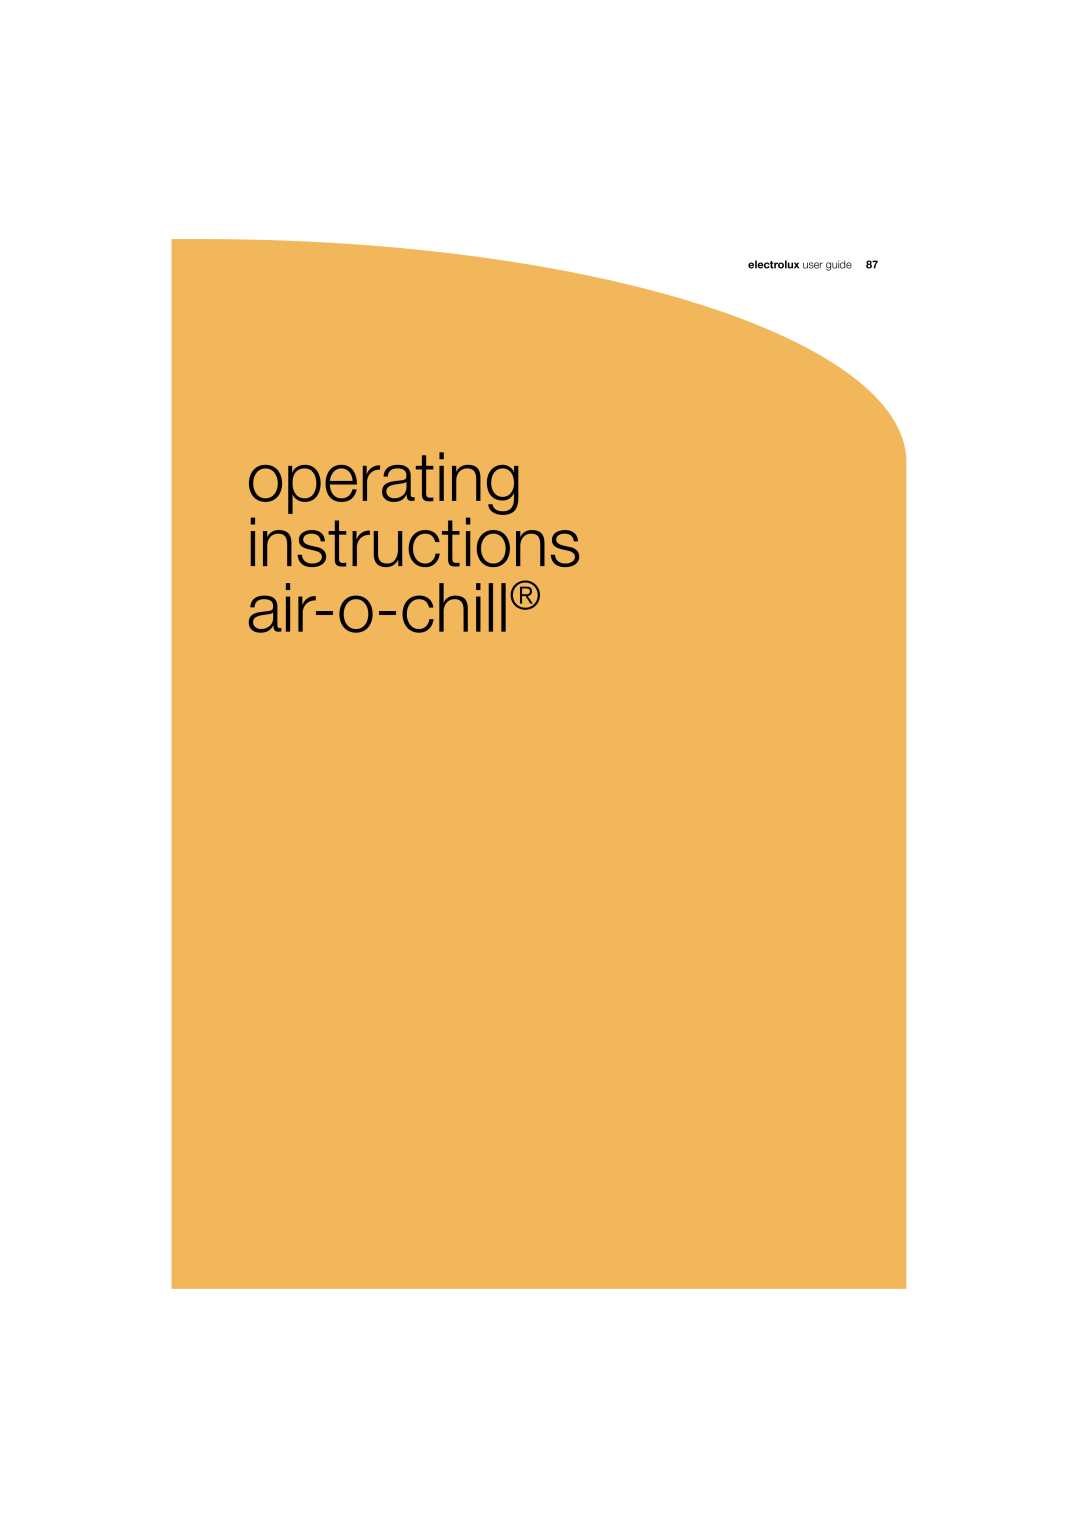 Electrolux 180 manual operating instructions air-o-chill, electrolux user guide 